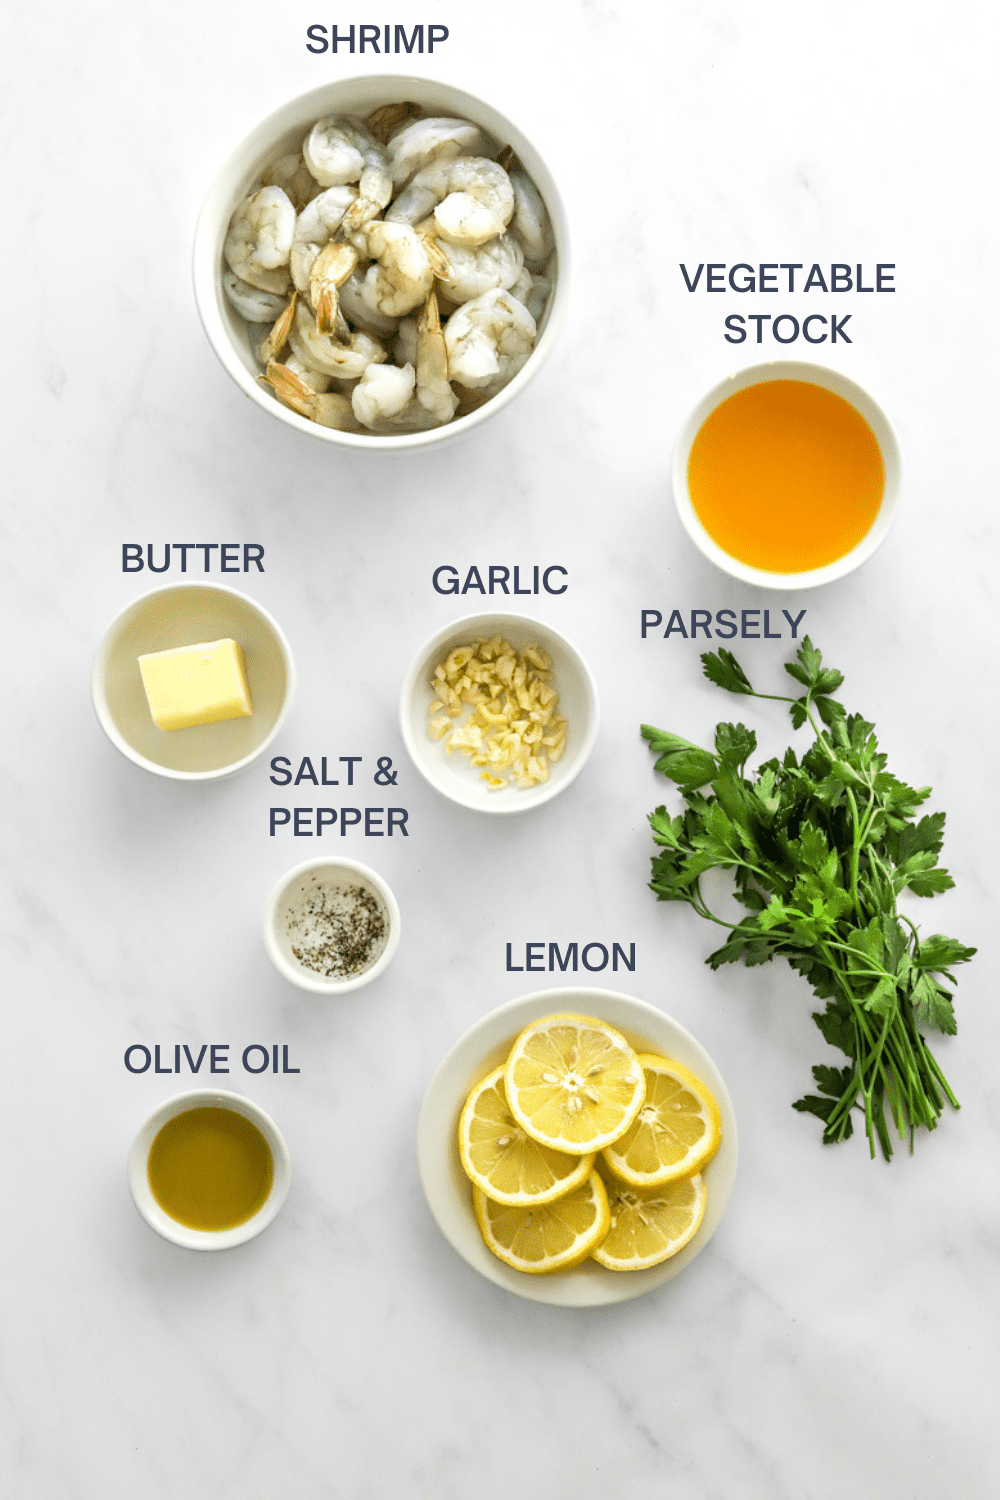 Ingredients for healthy shrimp scampi with labels for each ingredient. 